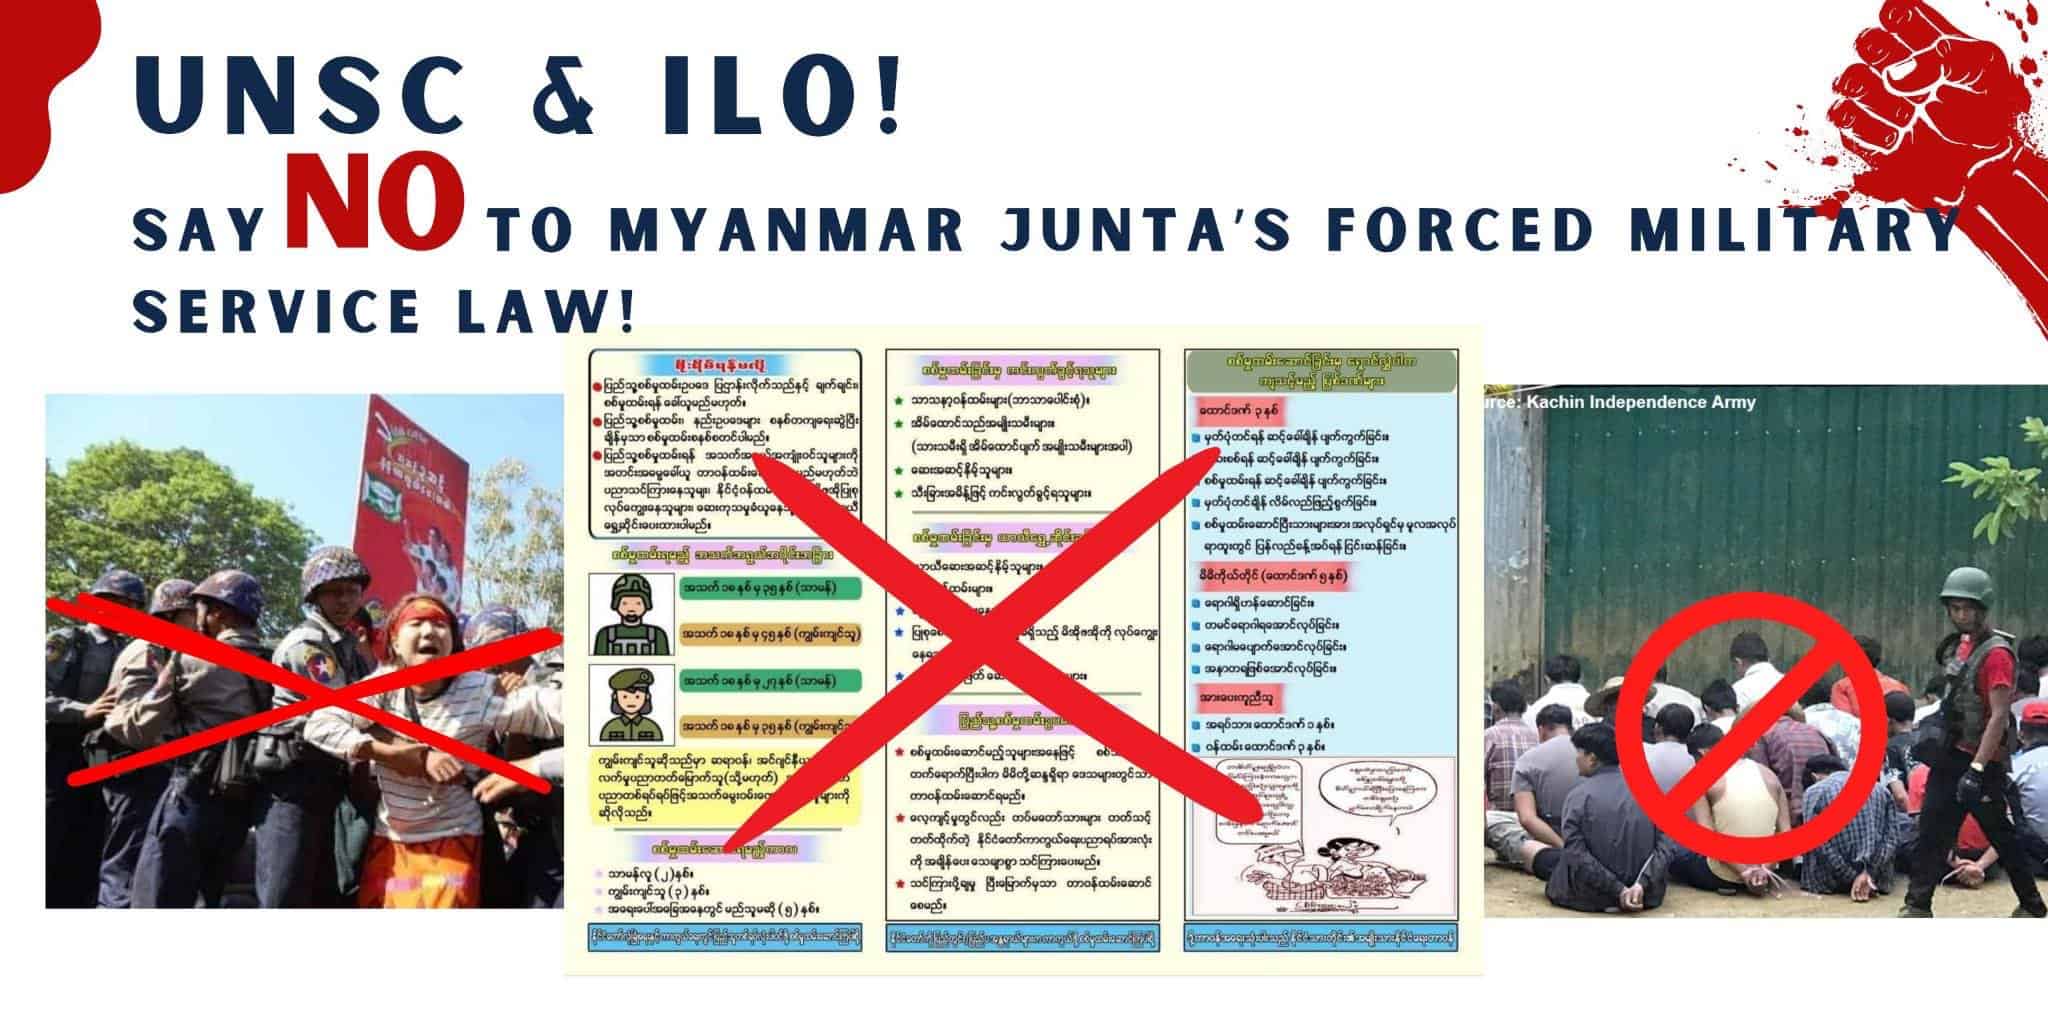 Urgent Call to UN and ILO to Stop Myanmar’s Forced Military Service